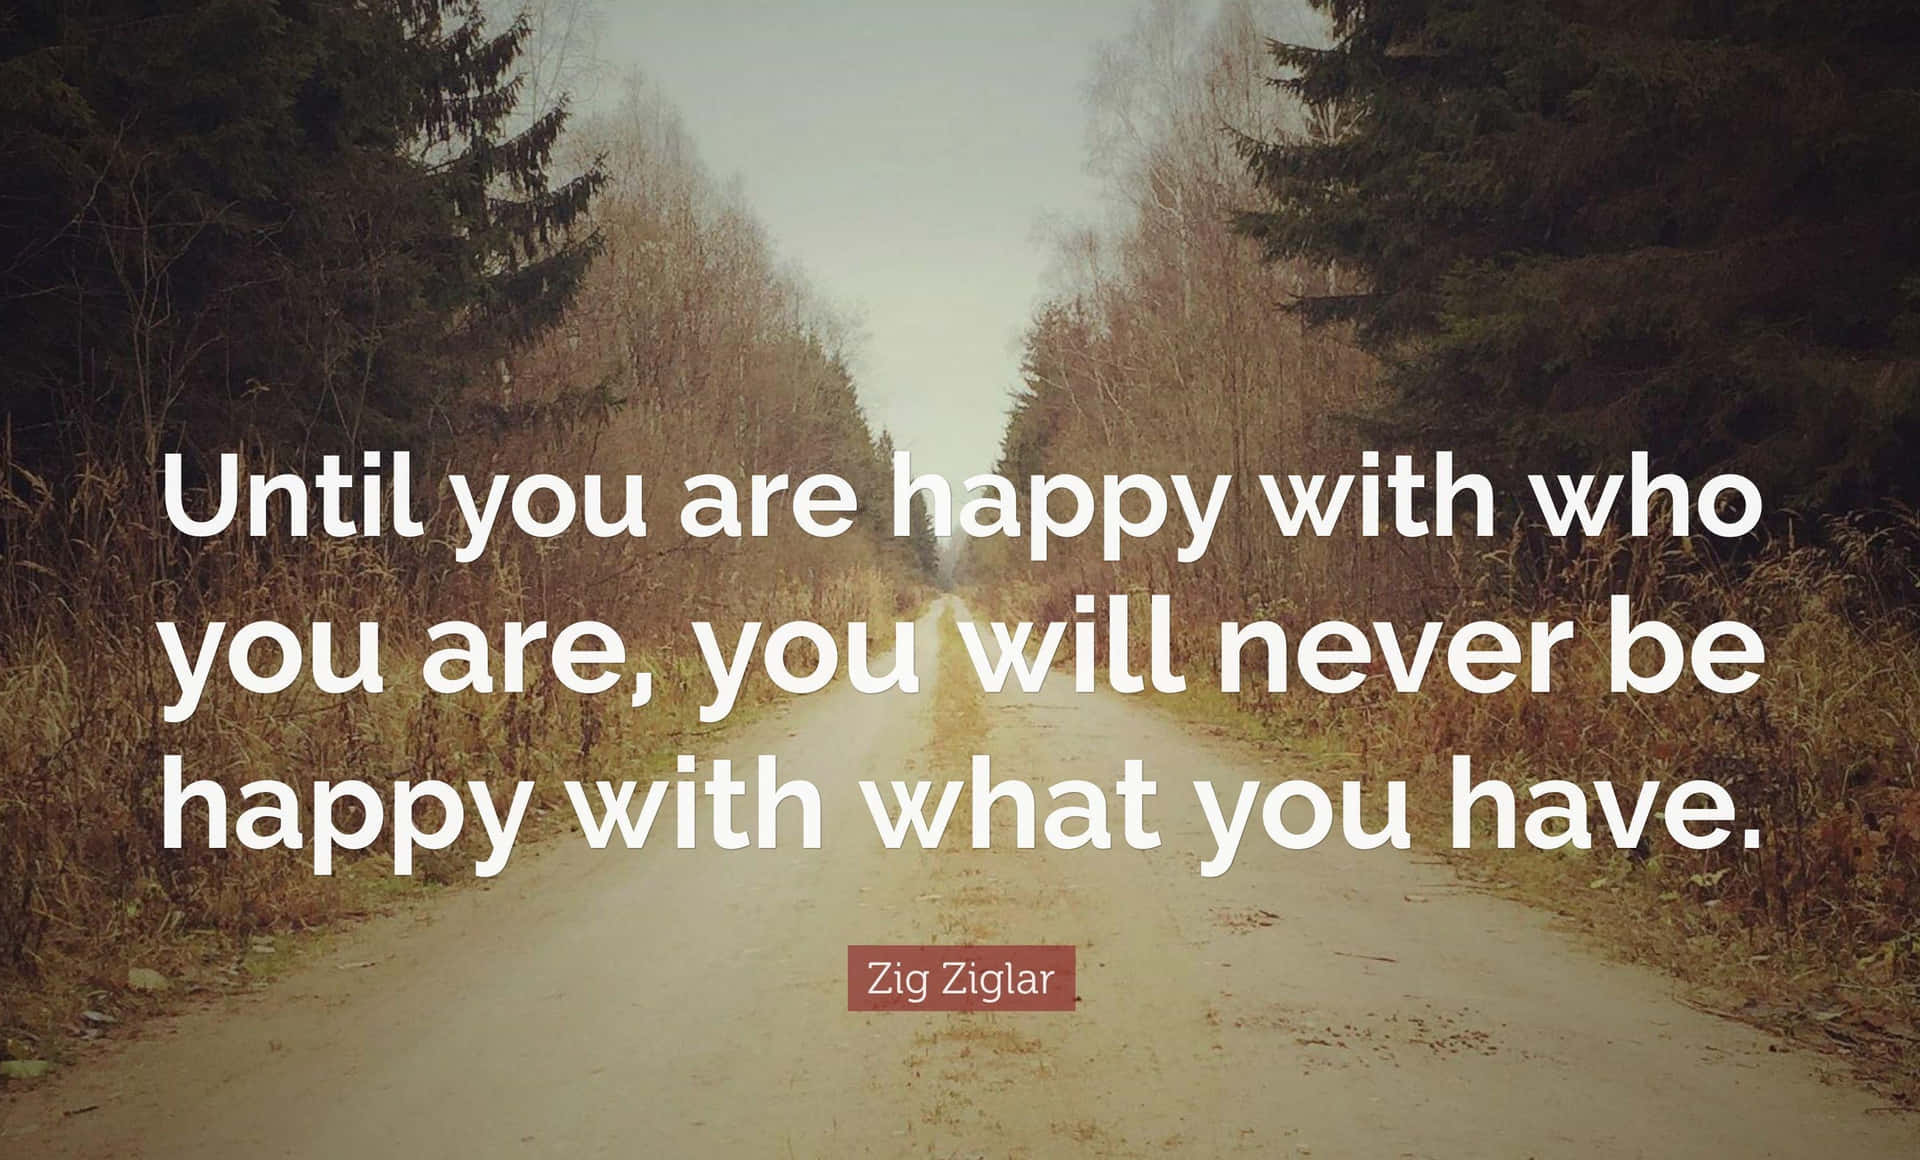 Until You Are Happy With Who You Are, You Will Never Be Happy With What You Have